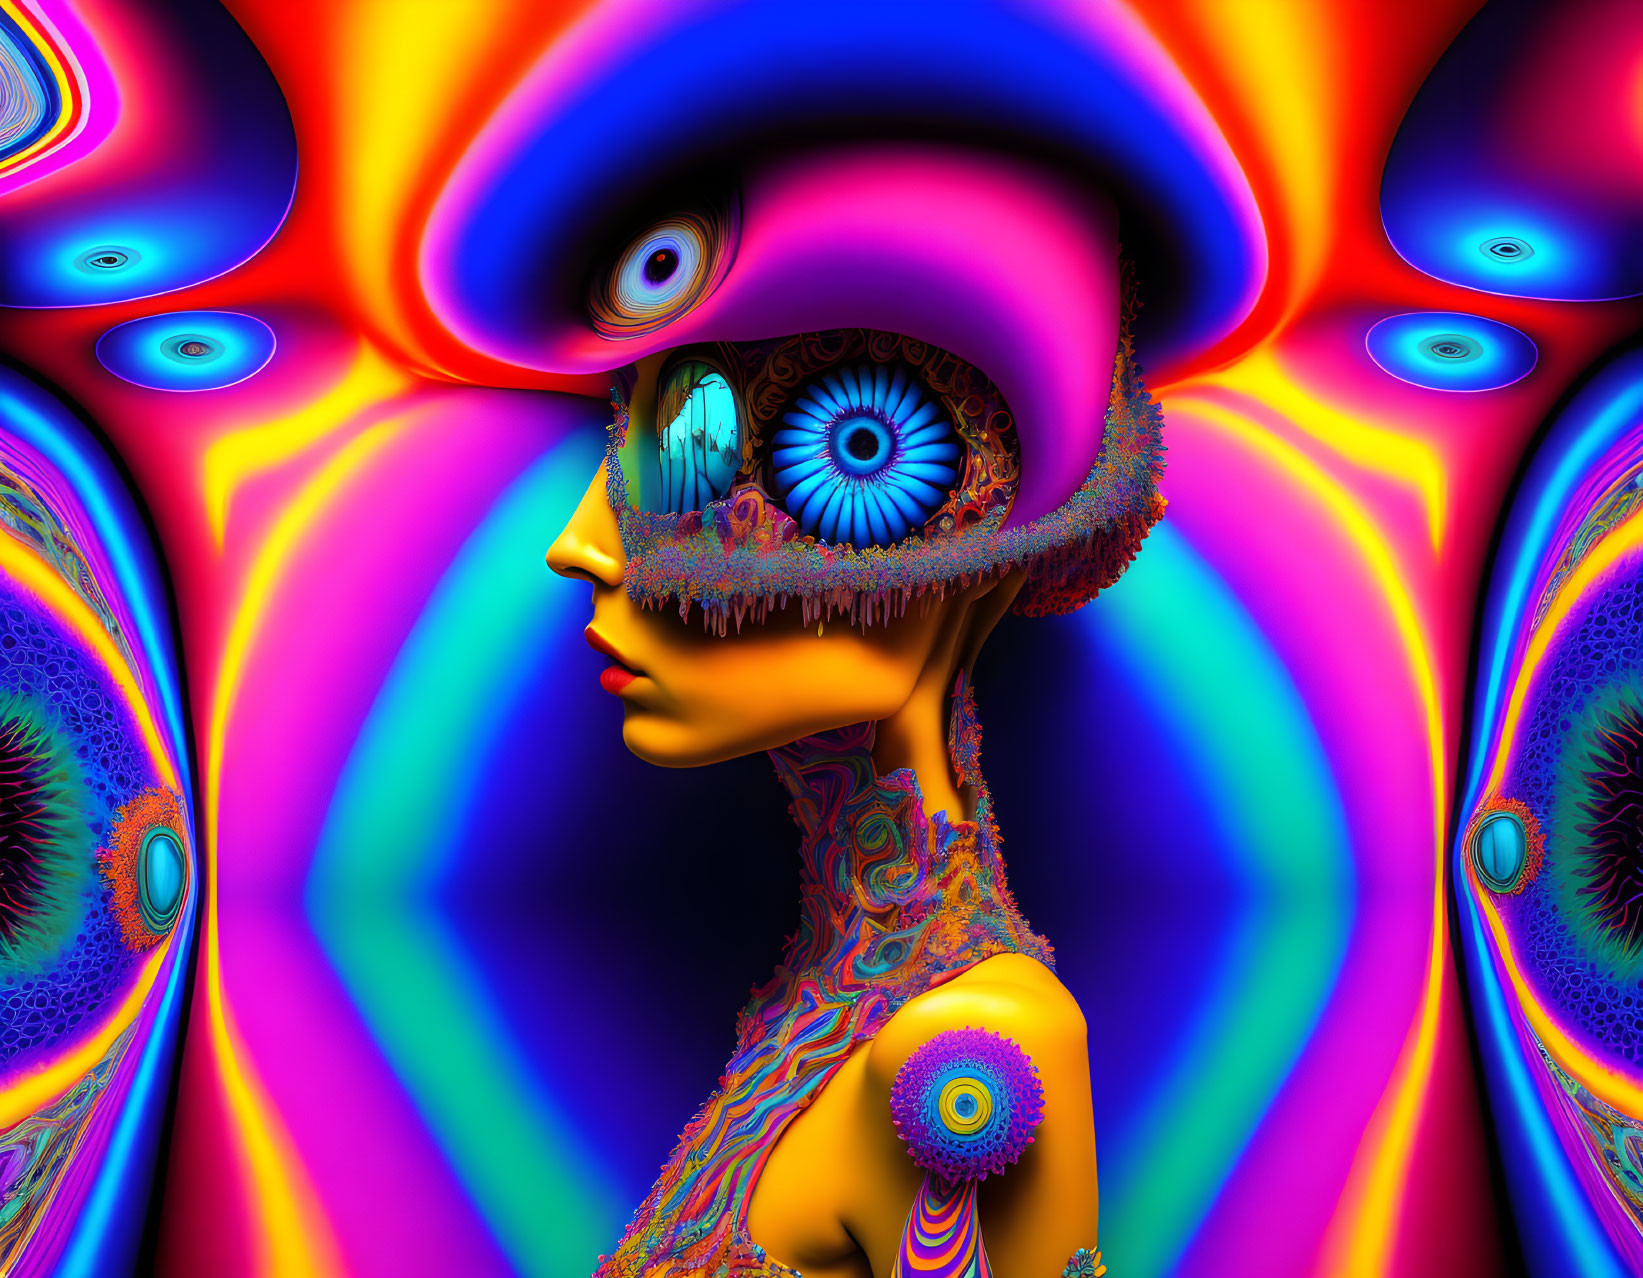 Vibrant surreal digital artwork with human profile and multiple eye patterns